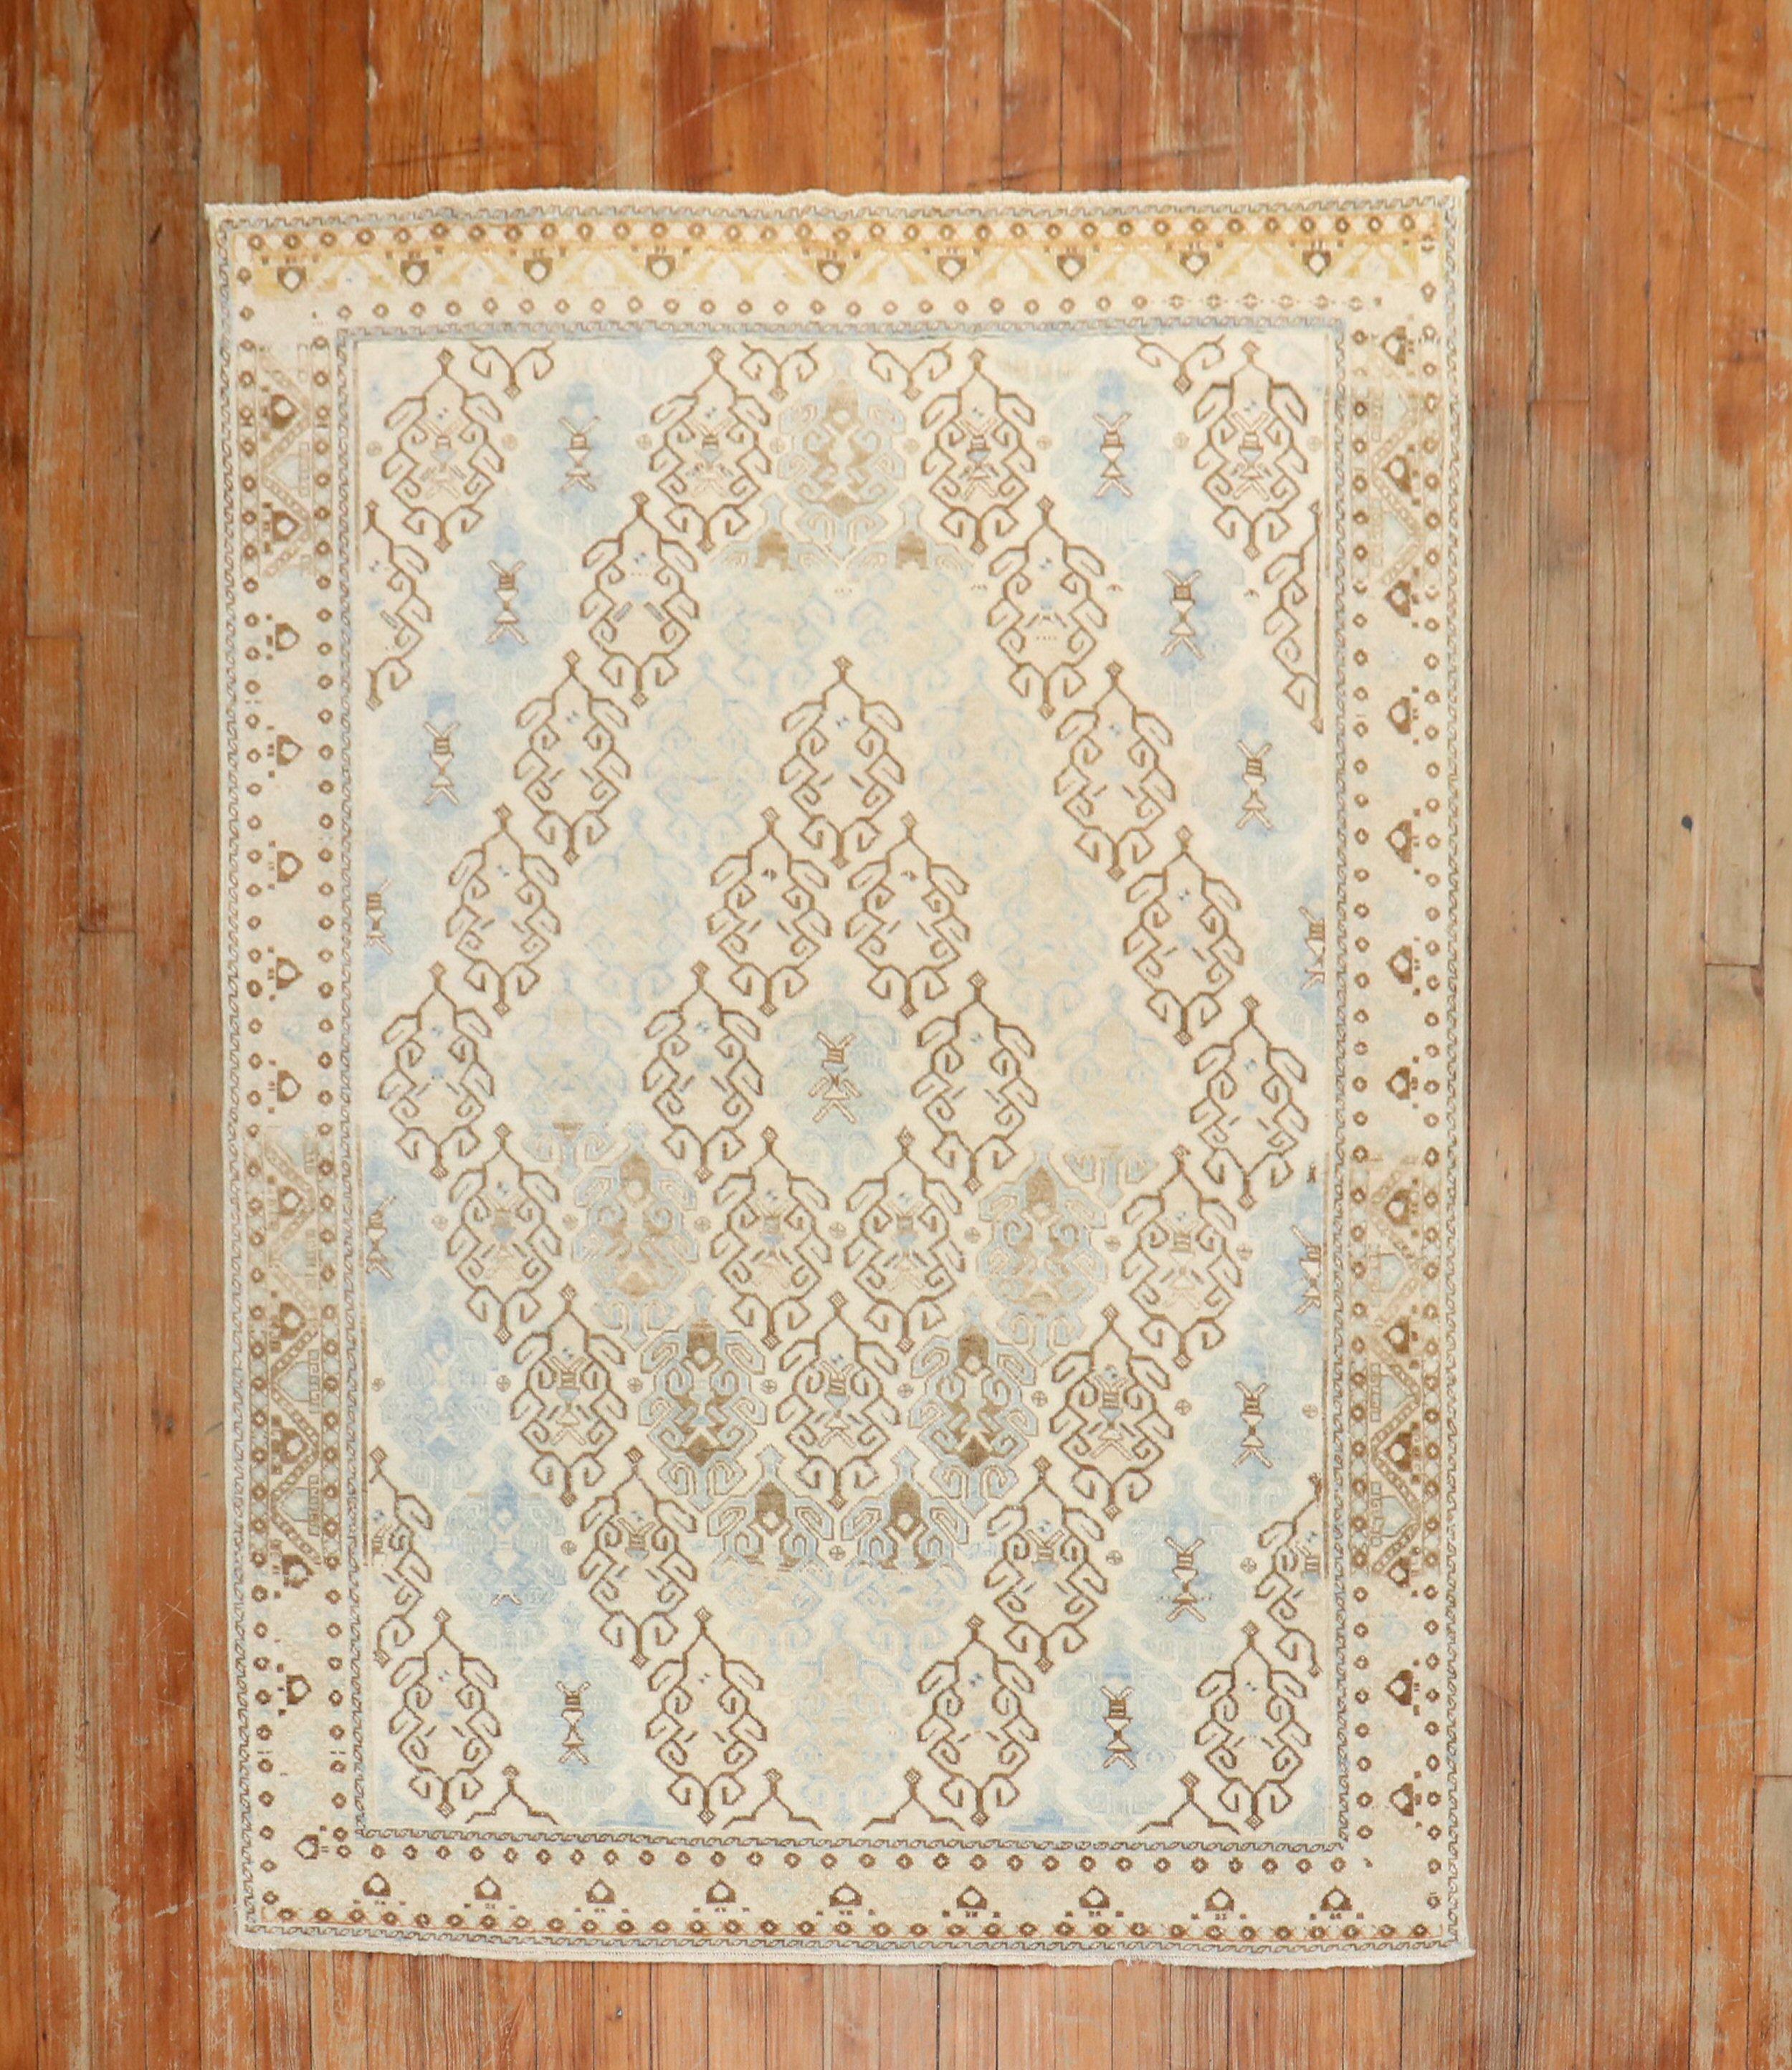 A mid 20th century Persian Kashan rug in beige, bnrown and baby blue.

Measures: 4'1'' x 5'6''.